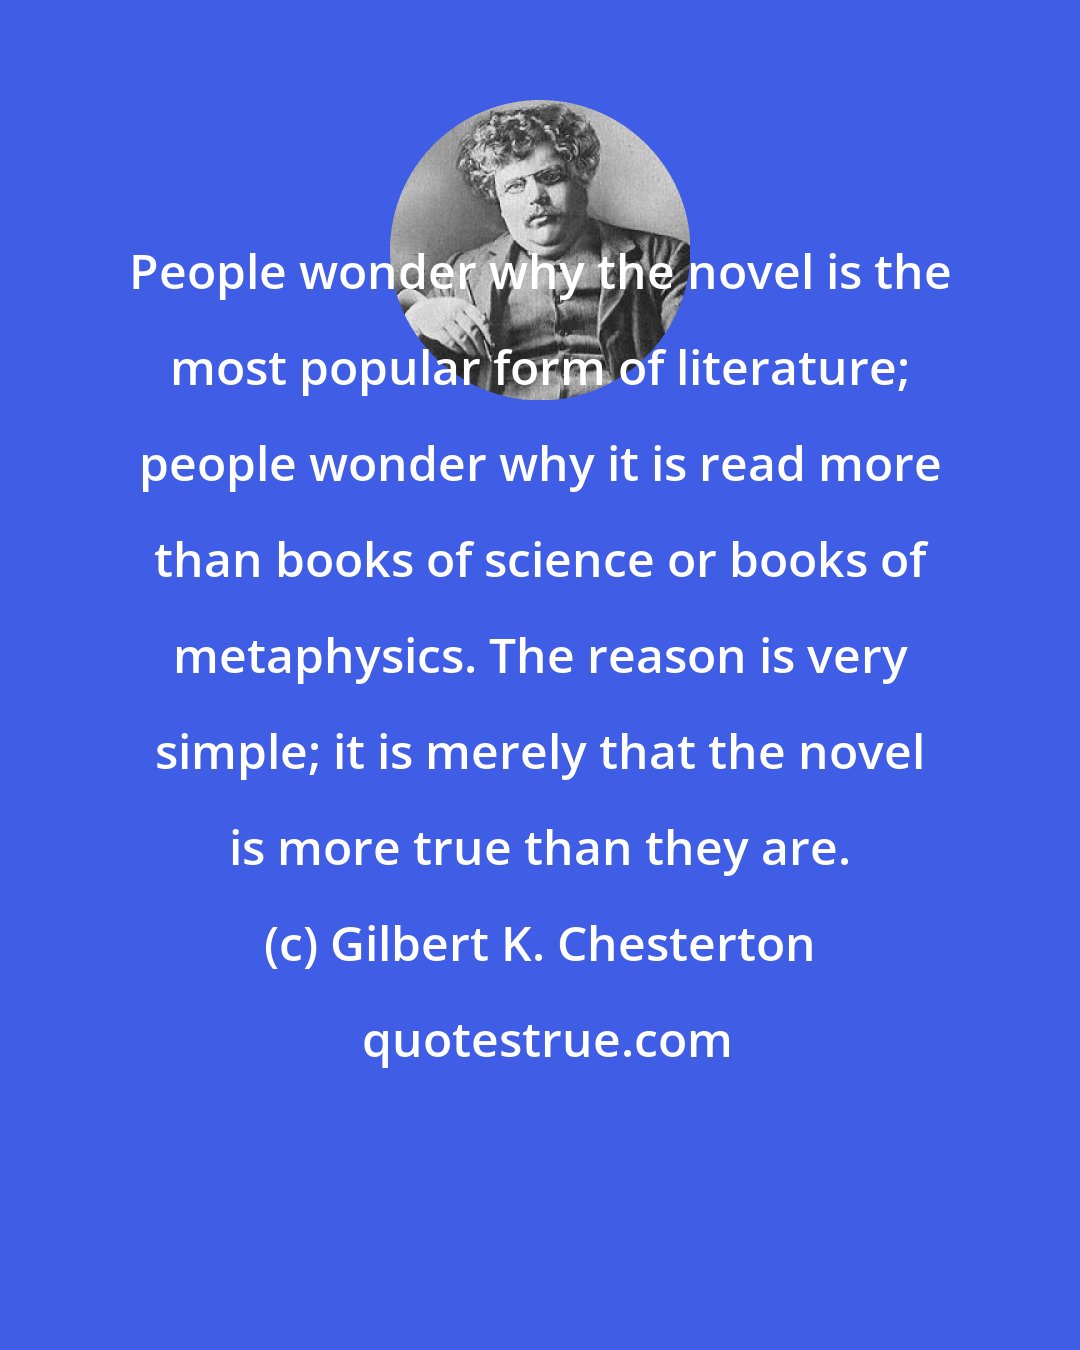 Gilbert K. Chesterton: People wonder why the novel is the most popular form of literature; people wonder why it is read more than books of science or books of metaphysics. The reason is very simple; it is merely that the novel is more true than they are.